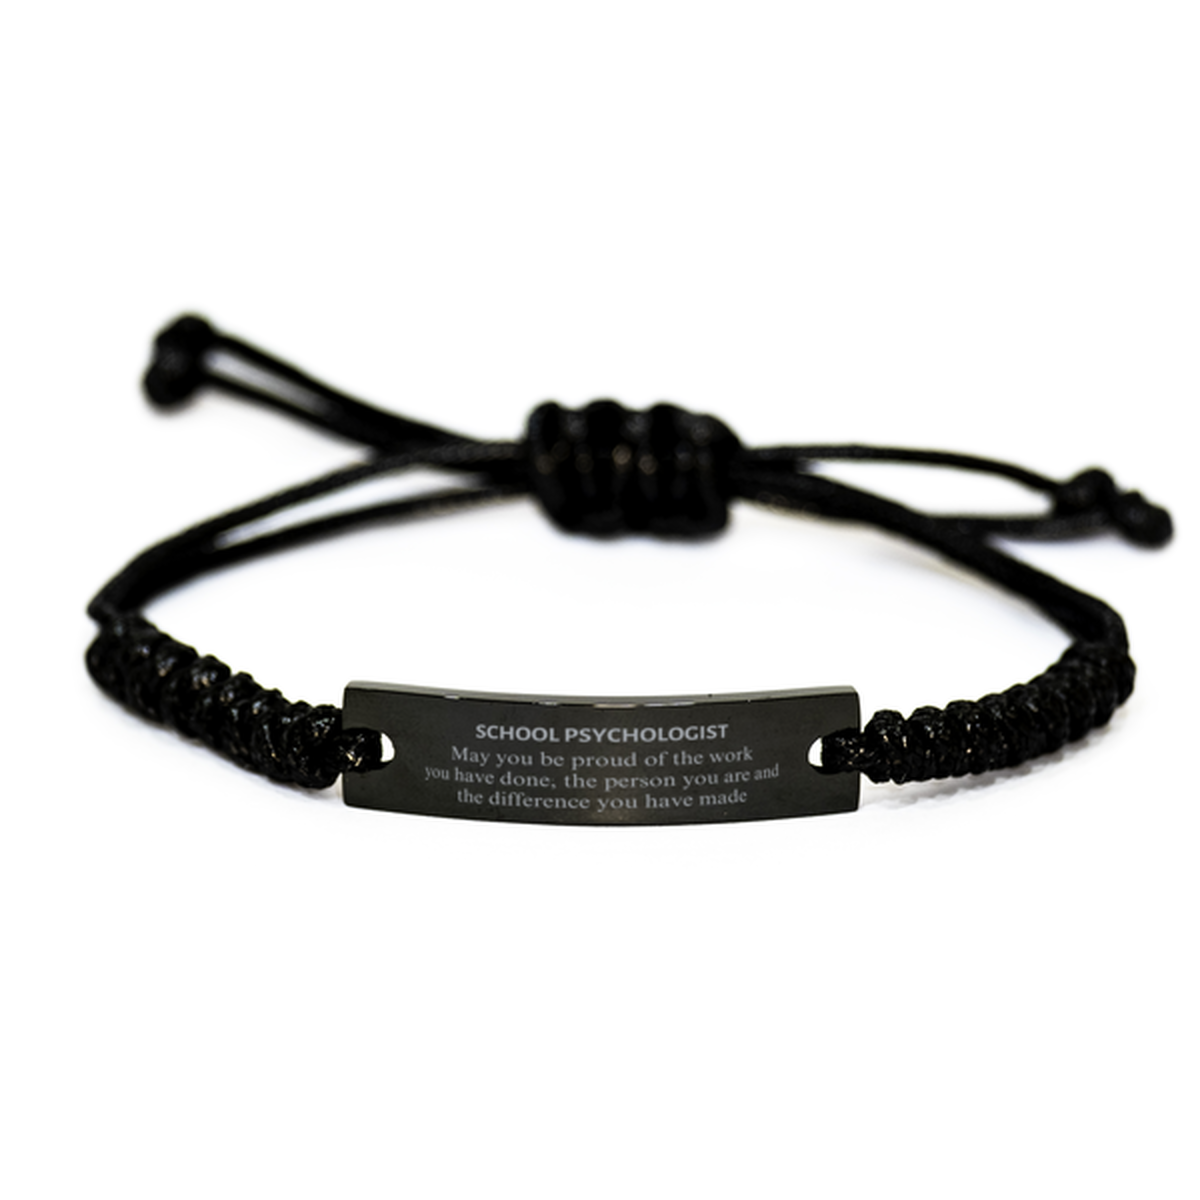 School Psychologist May you be proud of the work you have done, Retirement School Psychologist Black Rope Bracelet for Colleague Appreciation Gifts Amazing for School Psychologist